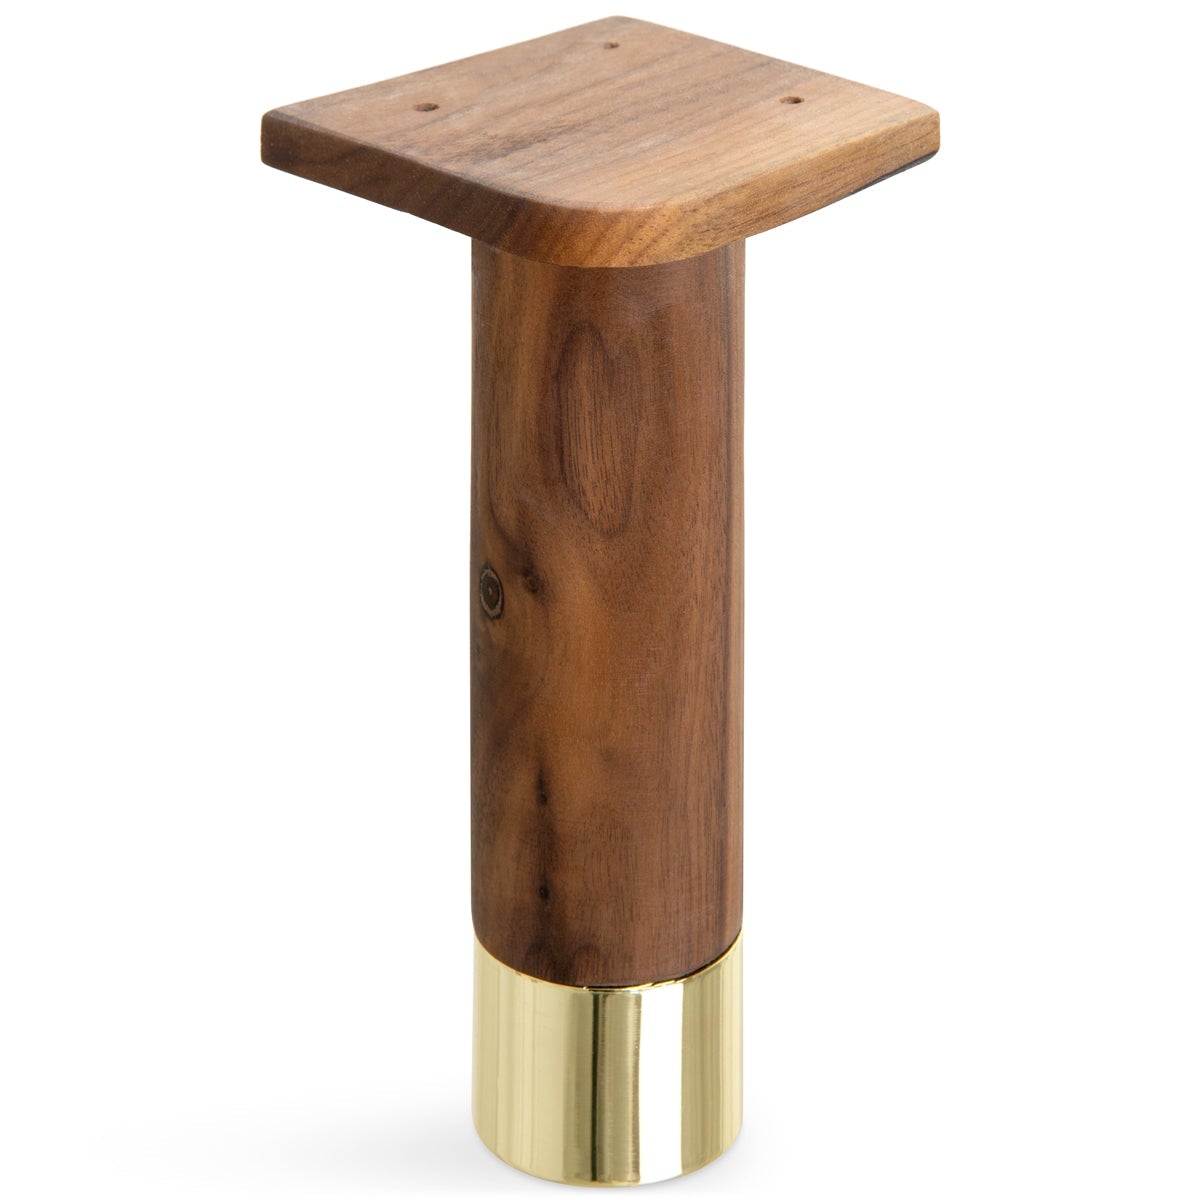 7&quot; Round Oiled Walnut with Metal Cap Leg (Set of 4)